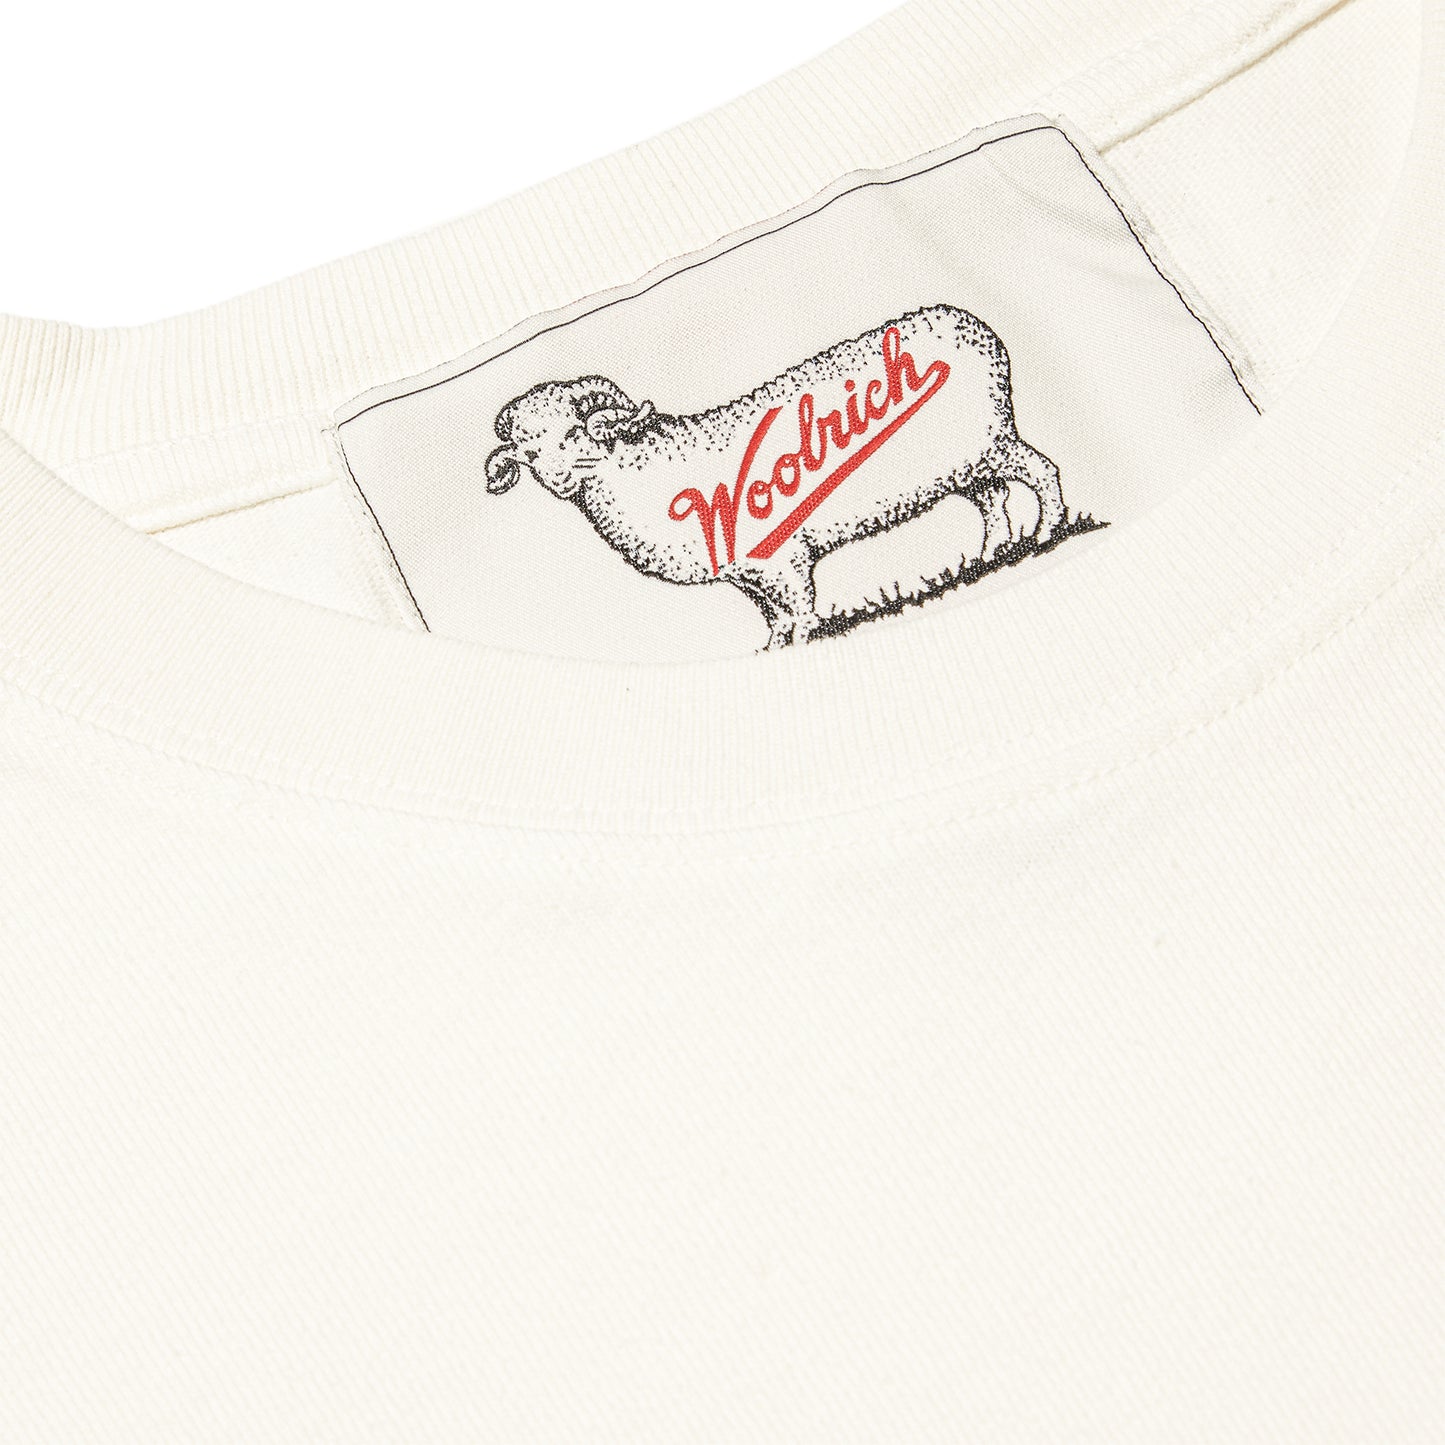 One Of These Days x Woolrich Long Sleeve Pocket Tee (Bone)